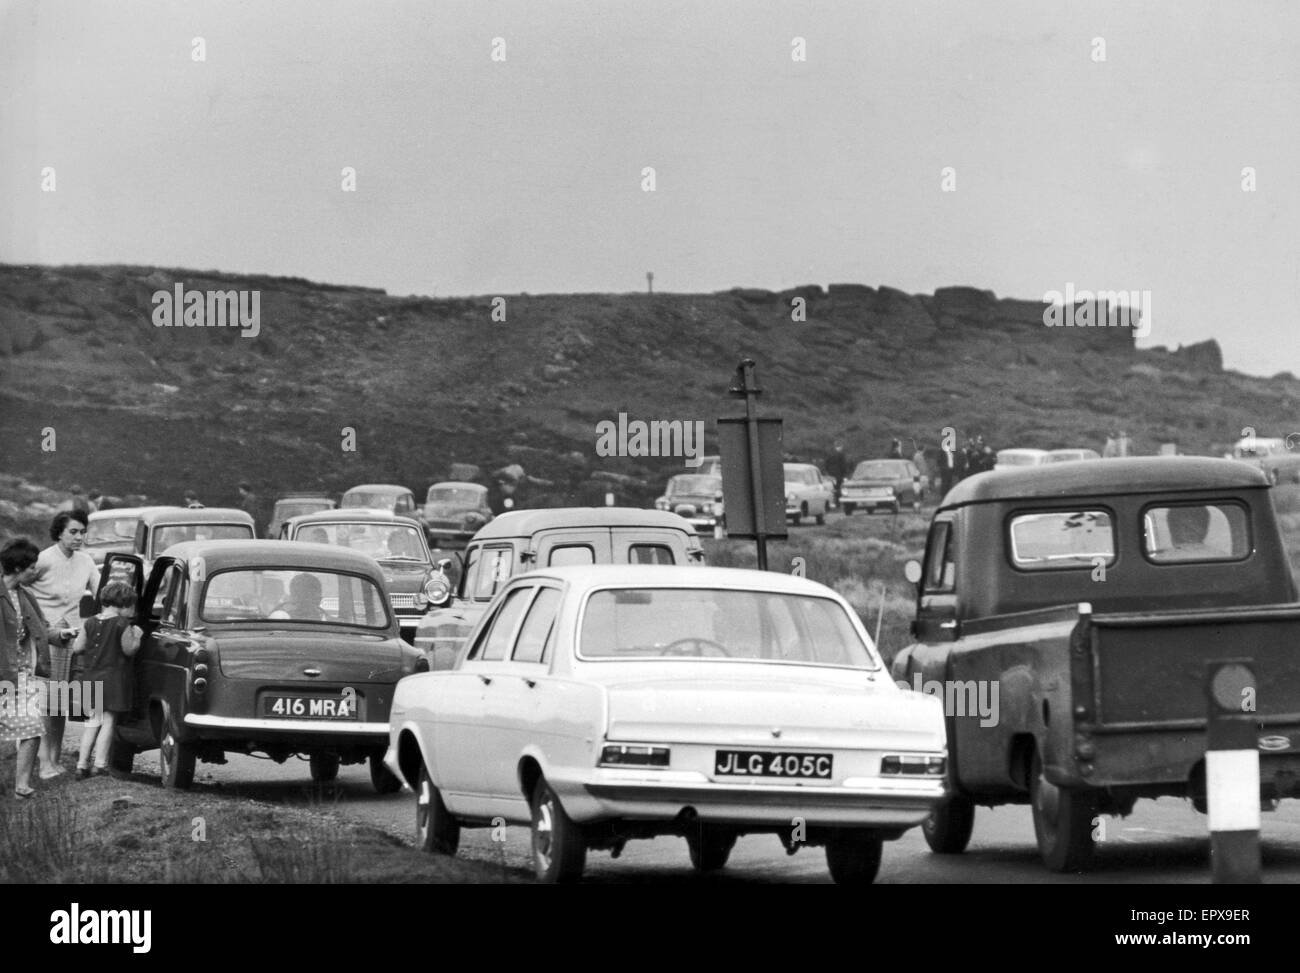 Sightseers on the Moors as Police search continues, Saddleworth Moor, 20th October 1965.  The Moors murders were carried out by Ian Brady and Myra Hindley between July 1963 and October 1965, in and around what is now Greater Manchester, England. The victi Stock Photo